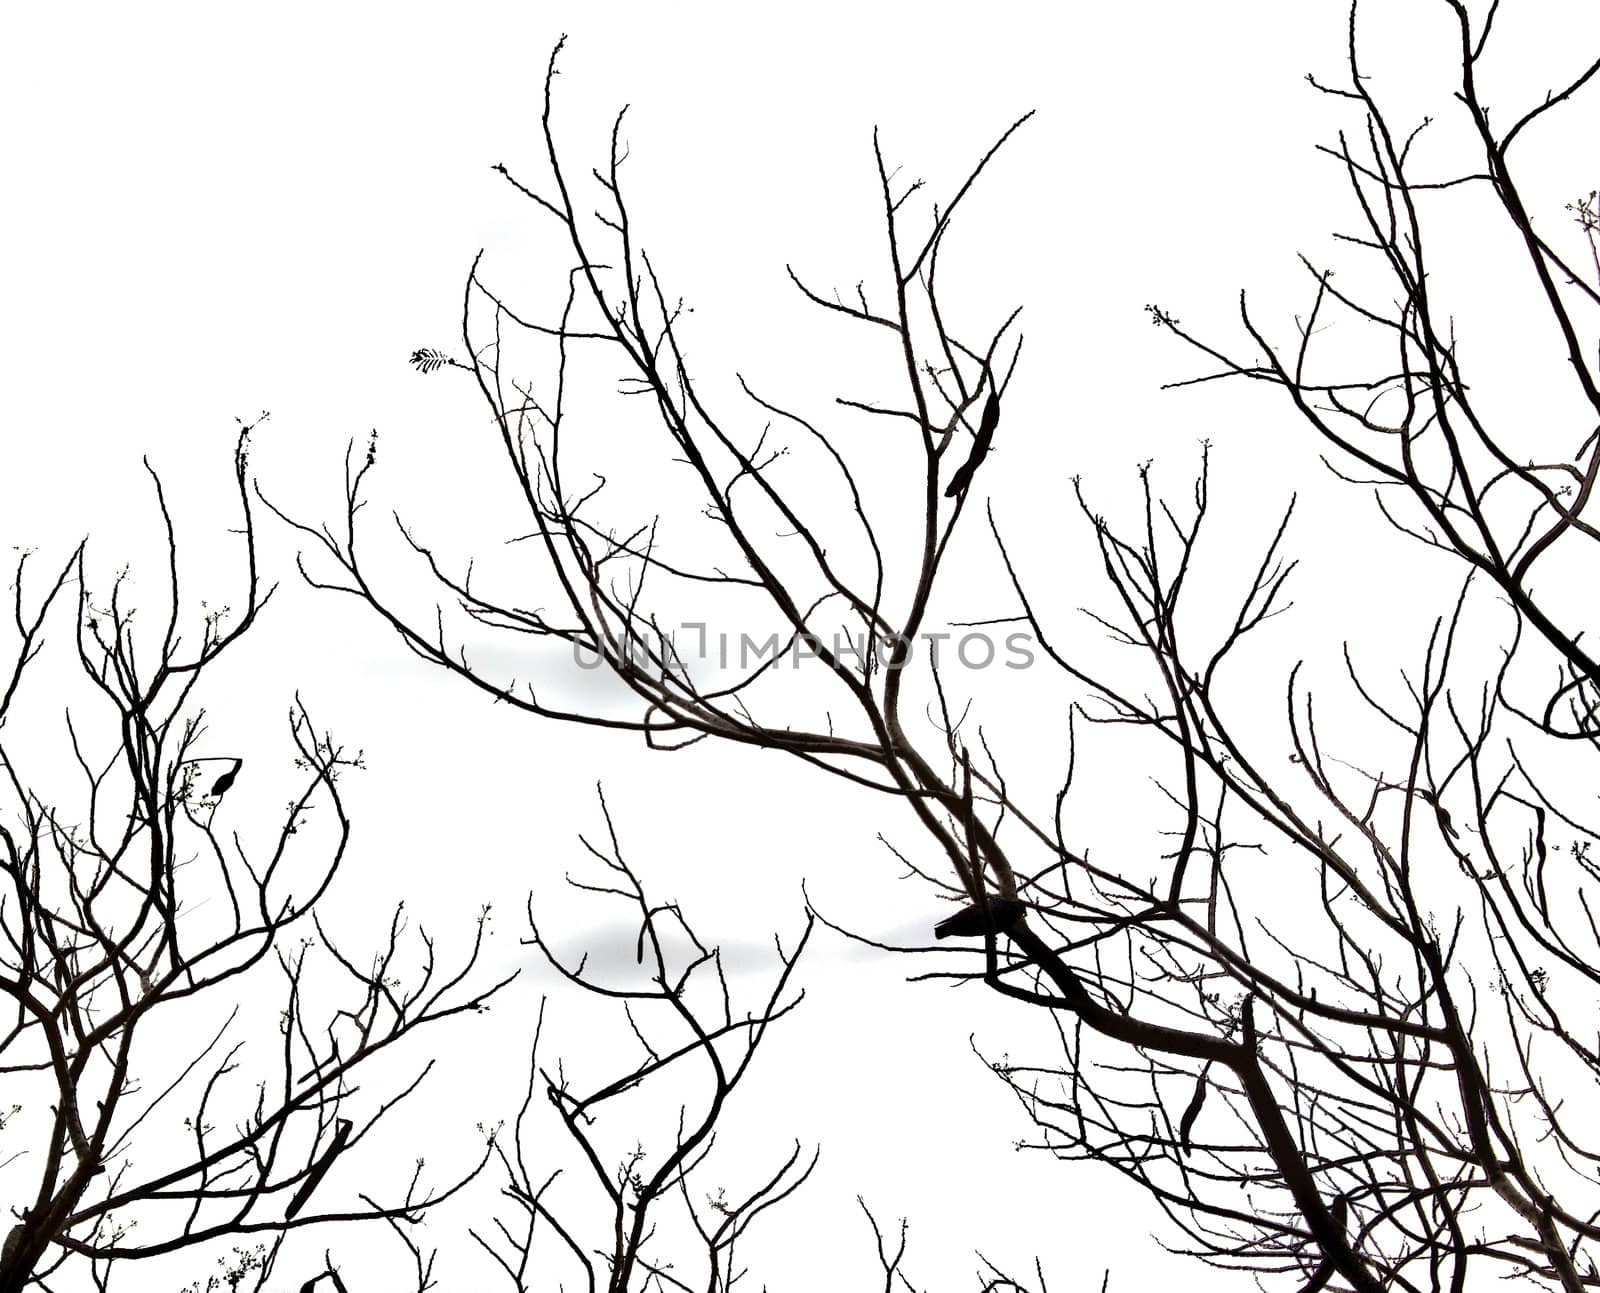 Leafless tree branches abstract background. Black and white